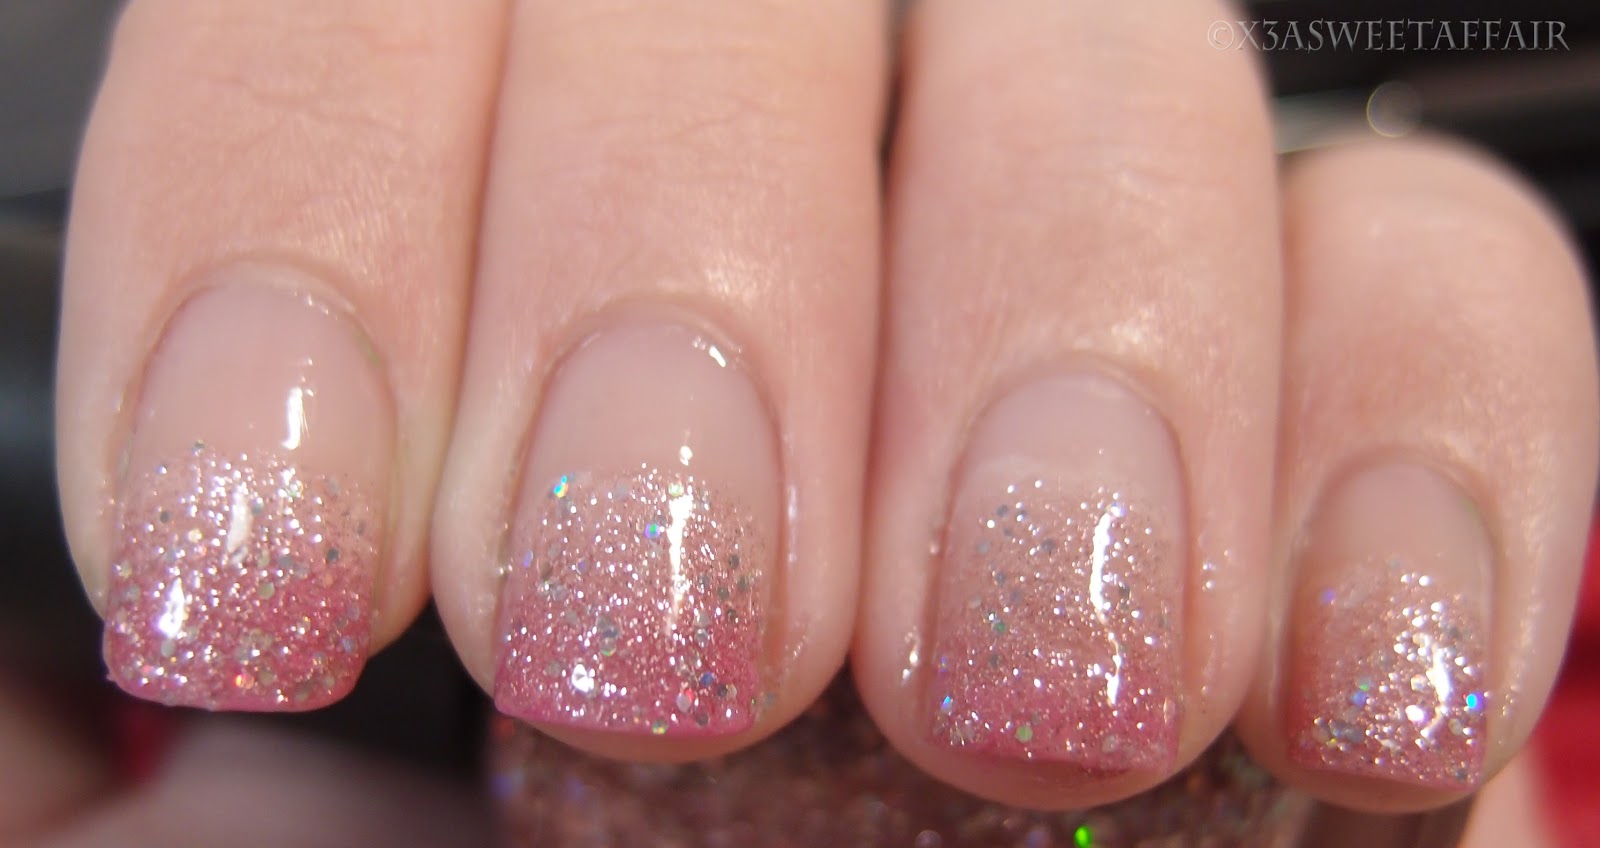 x3ASweetAffair Naturally Nails Pink ombre glitter